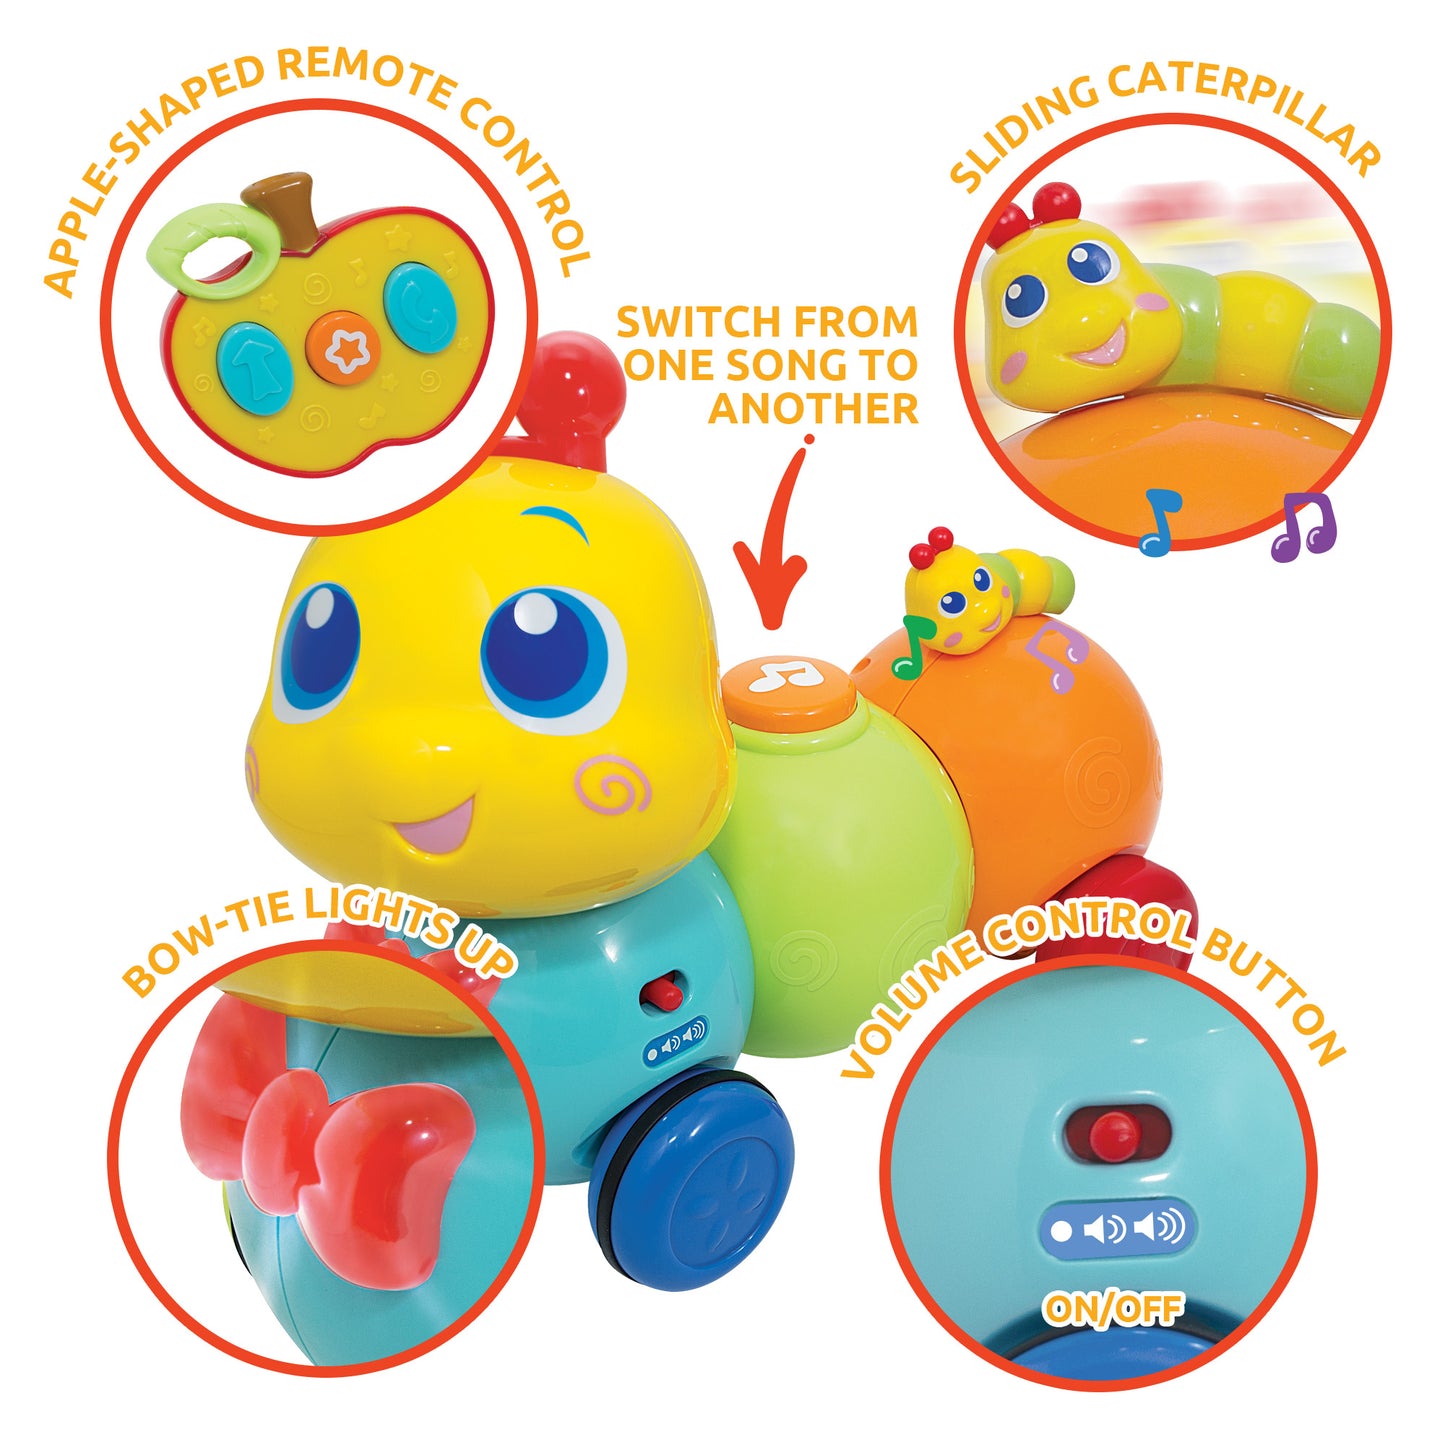 KiddoLab Crawling Caterpillar Baby Toy - Apple-Shaped Remote Control with Easy-Press Buttons- Plays 10 Children's Nursery Rhymes - Musical Toys for Toddlers 1,2,3 Years Old Boys and Girls